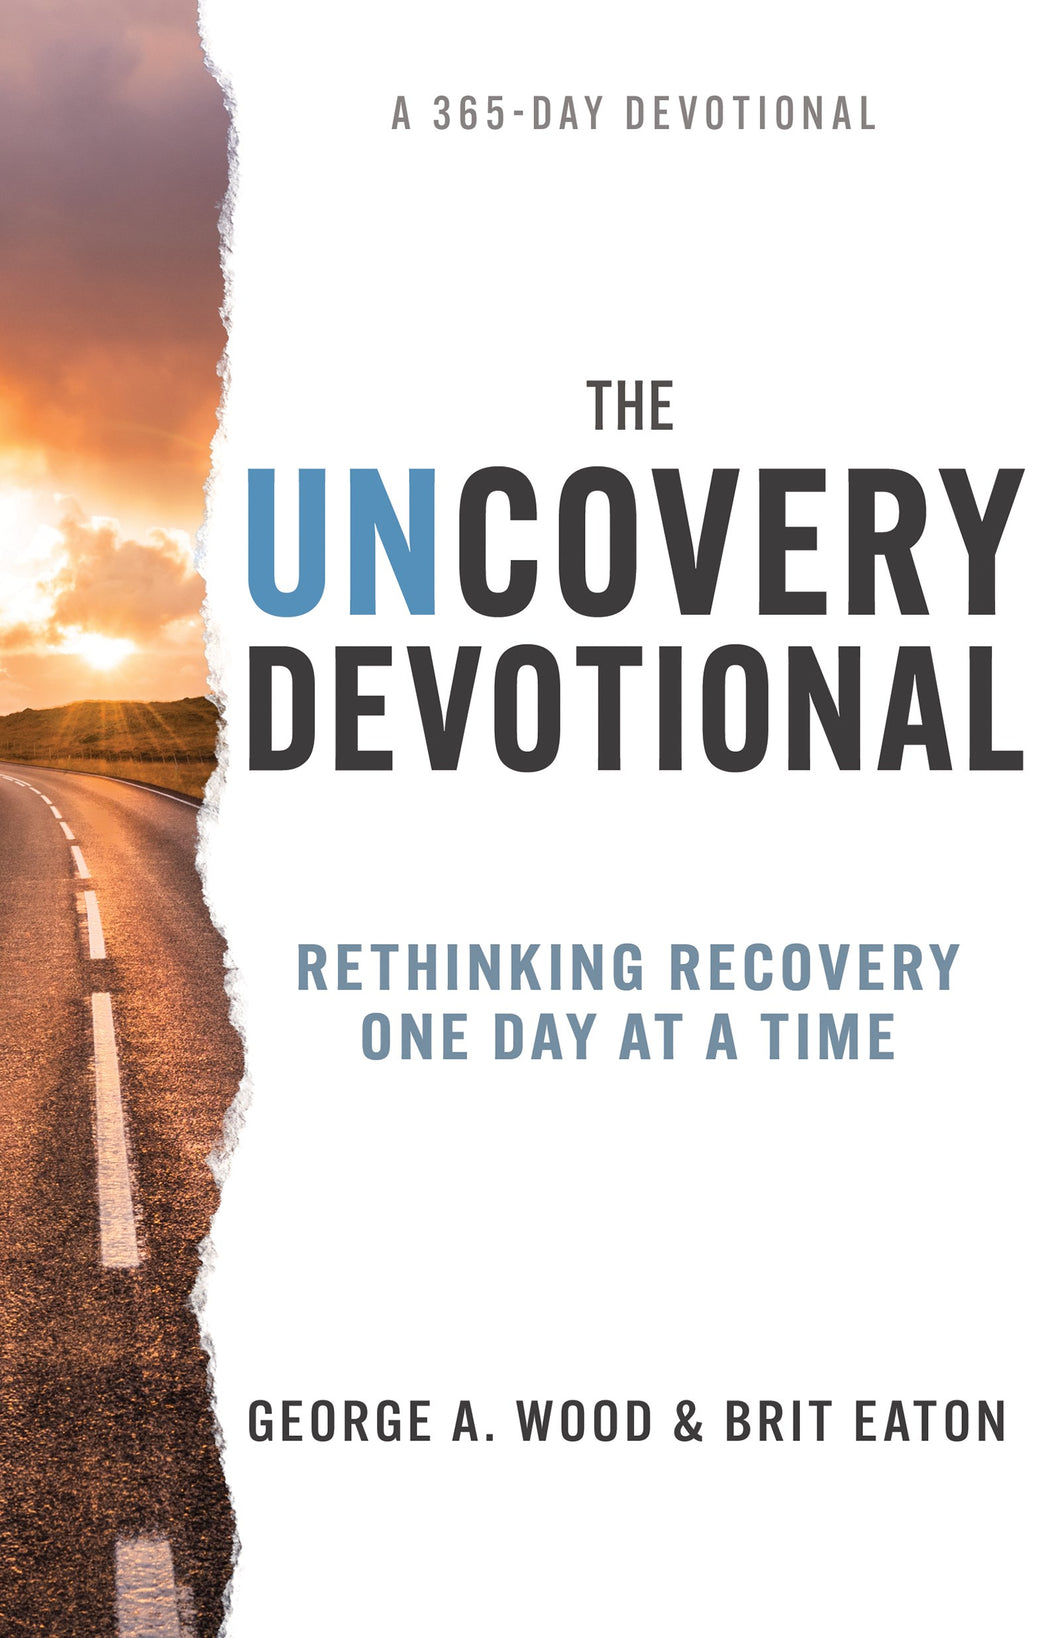 Uncovery Devotional